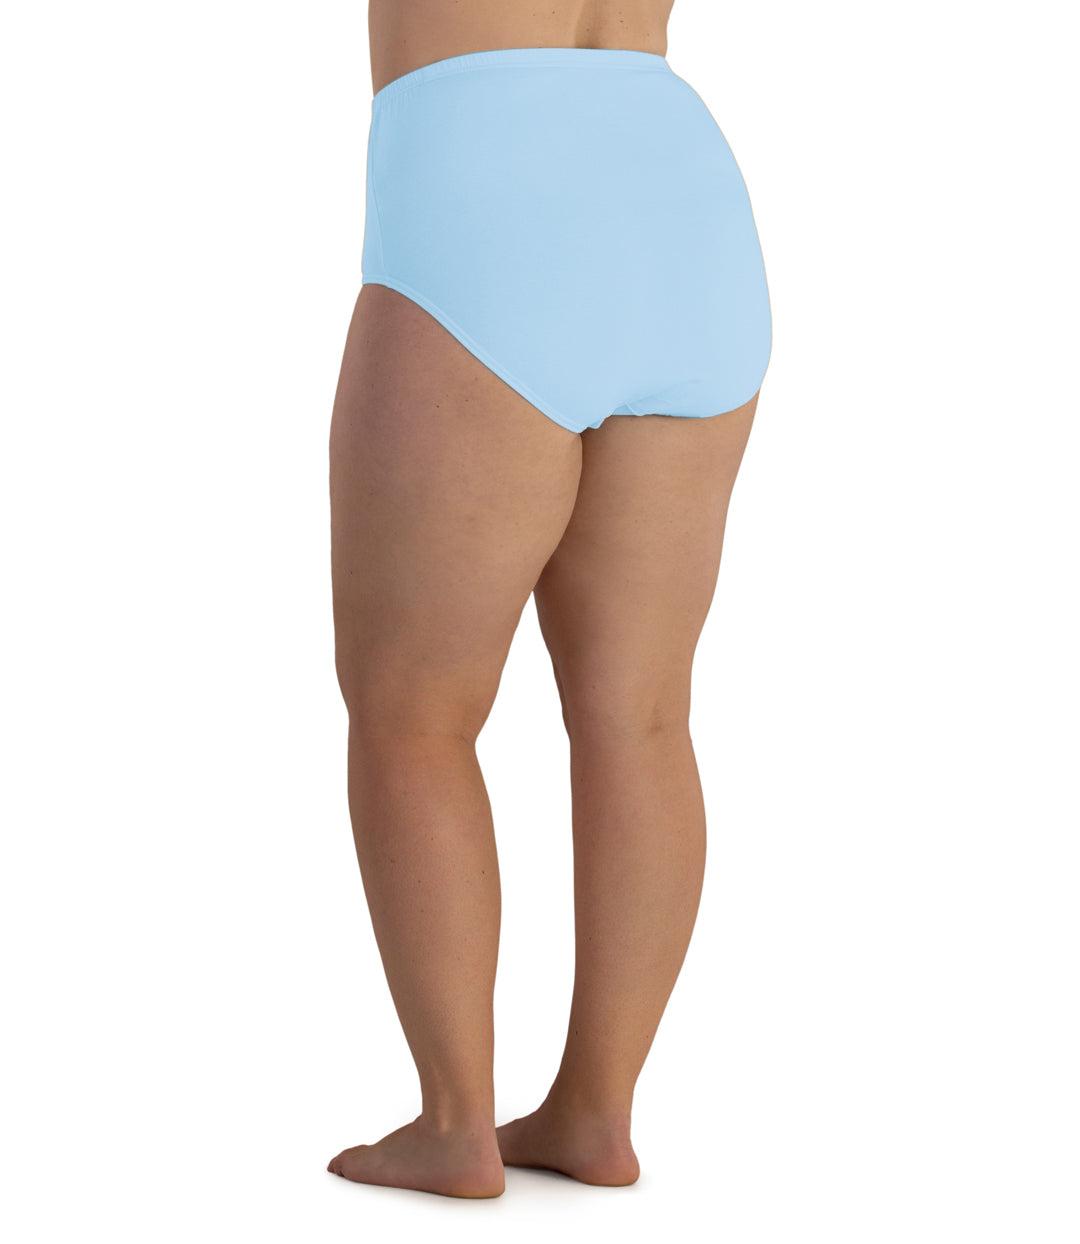 Bottom half of plus sized woman, back view, wearing JunoActive Junowear Cotton Stretch Classic Full Fit Brief in bluebell. This brief has a high waist fit with conservative leg opening.